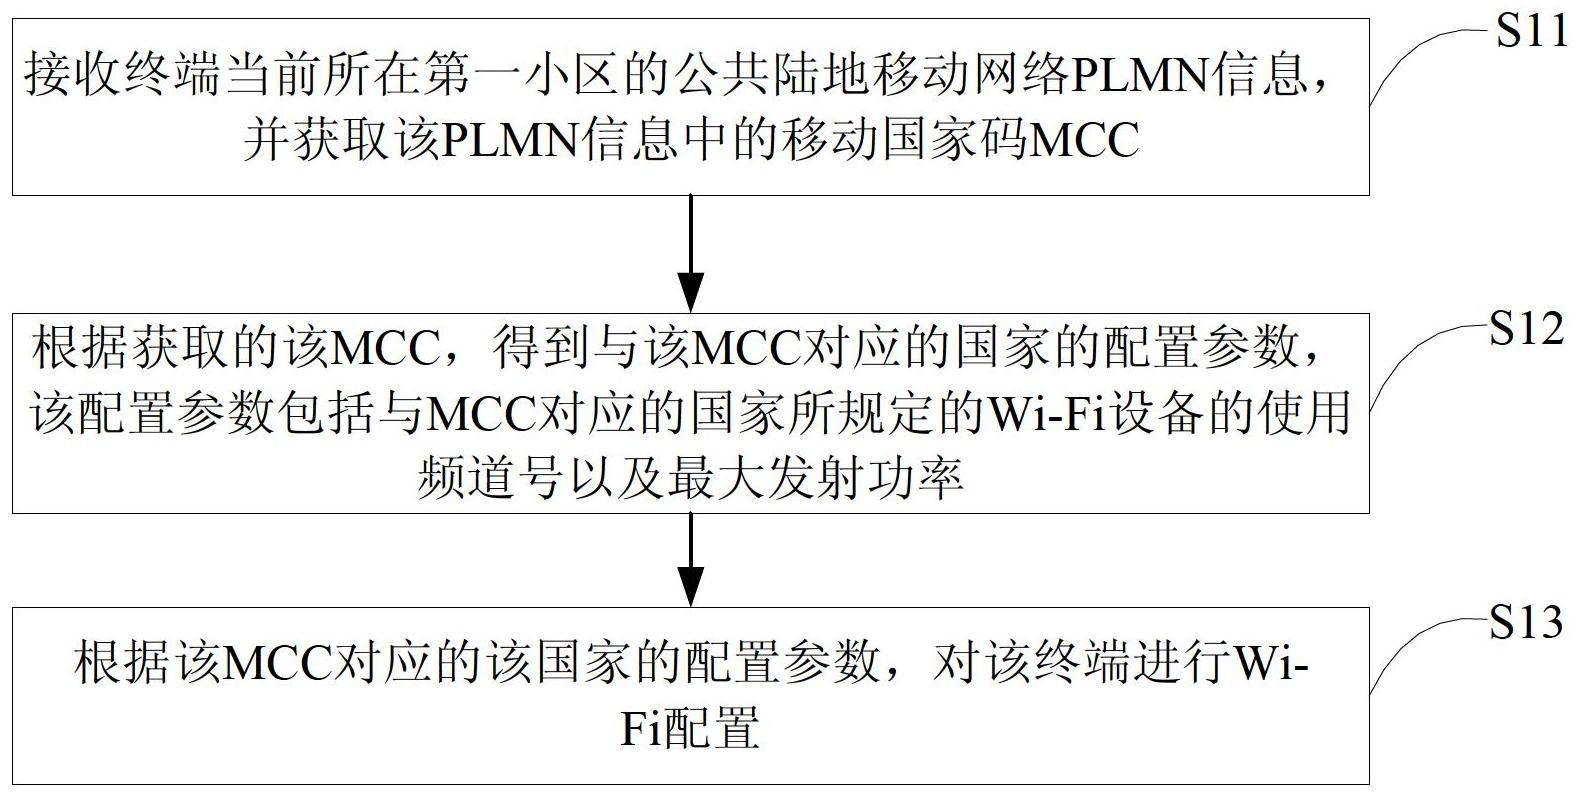 Wi-Fi configuration method and system